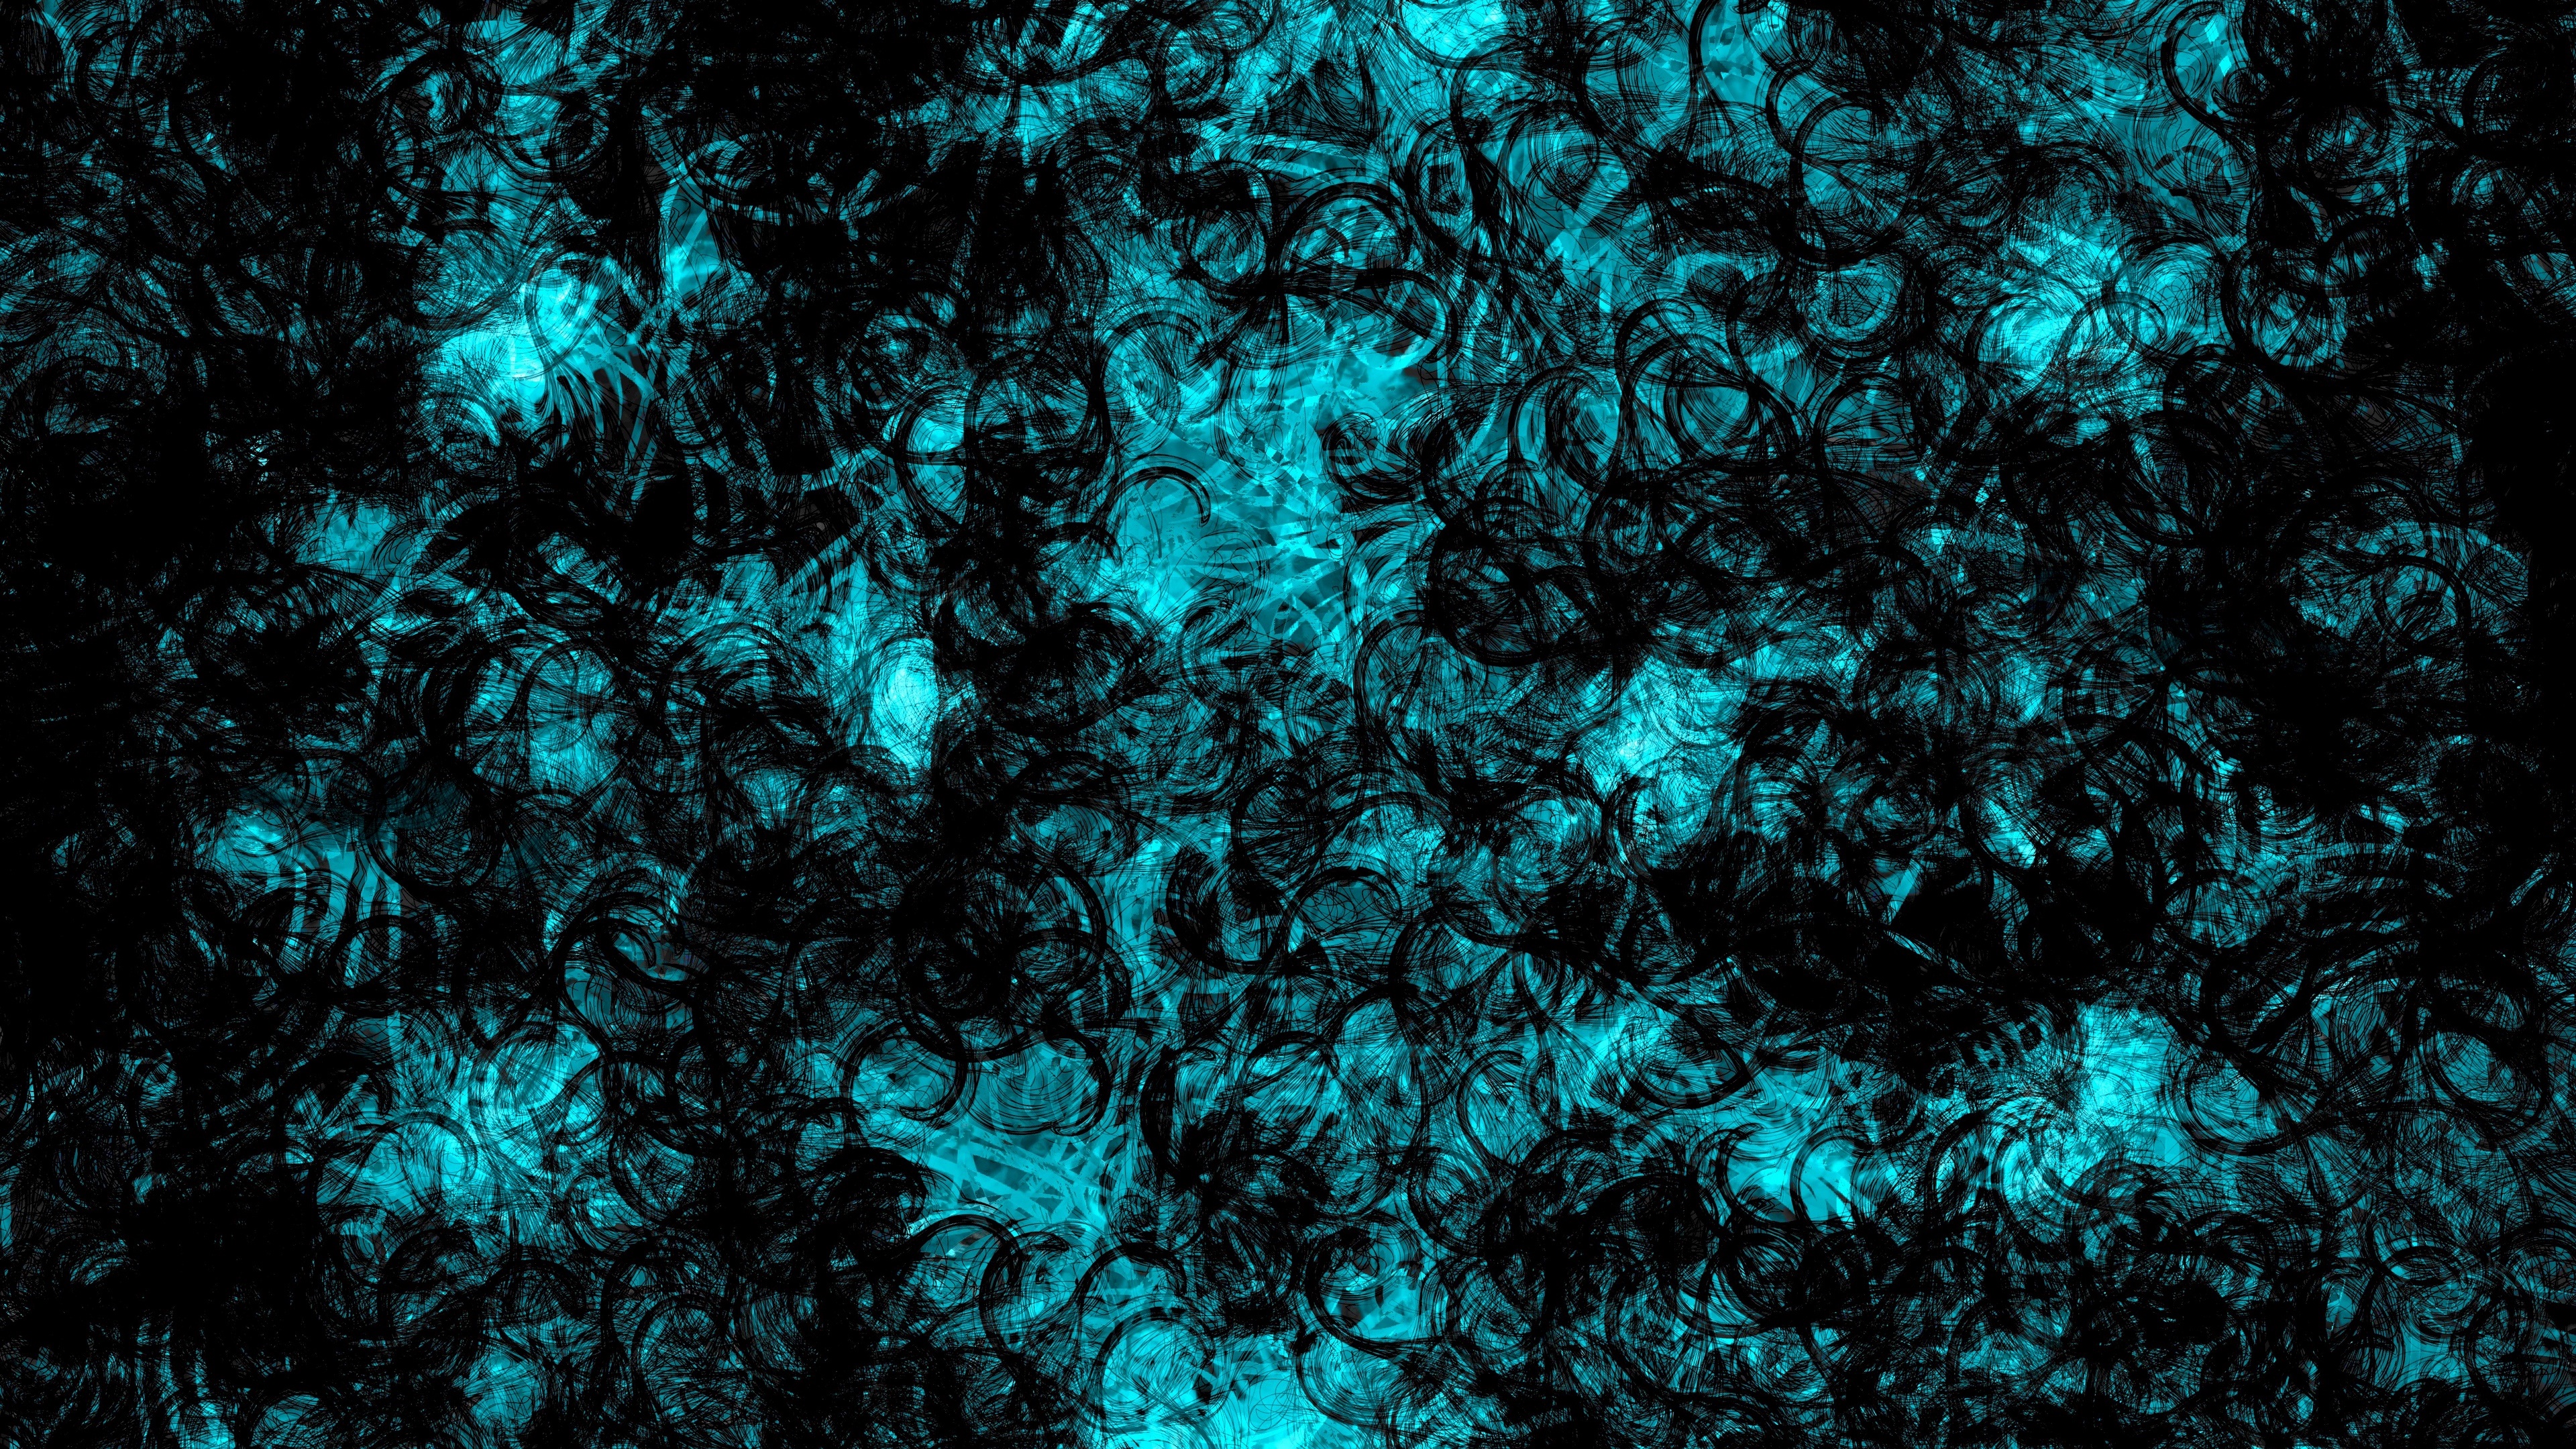 Abstract Turquoise 4k Ultra HD Wallpaper | Background Image | 3840x2160
